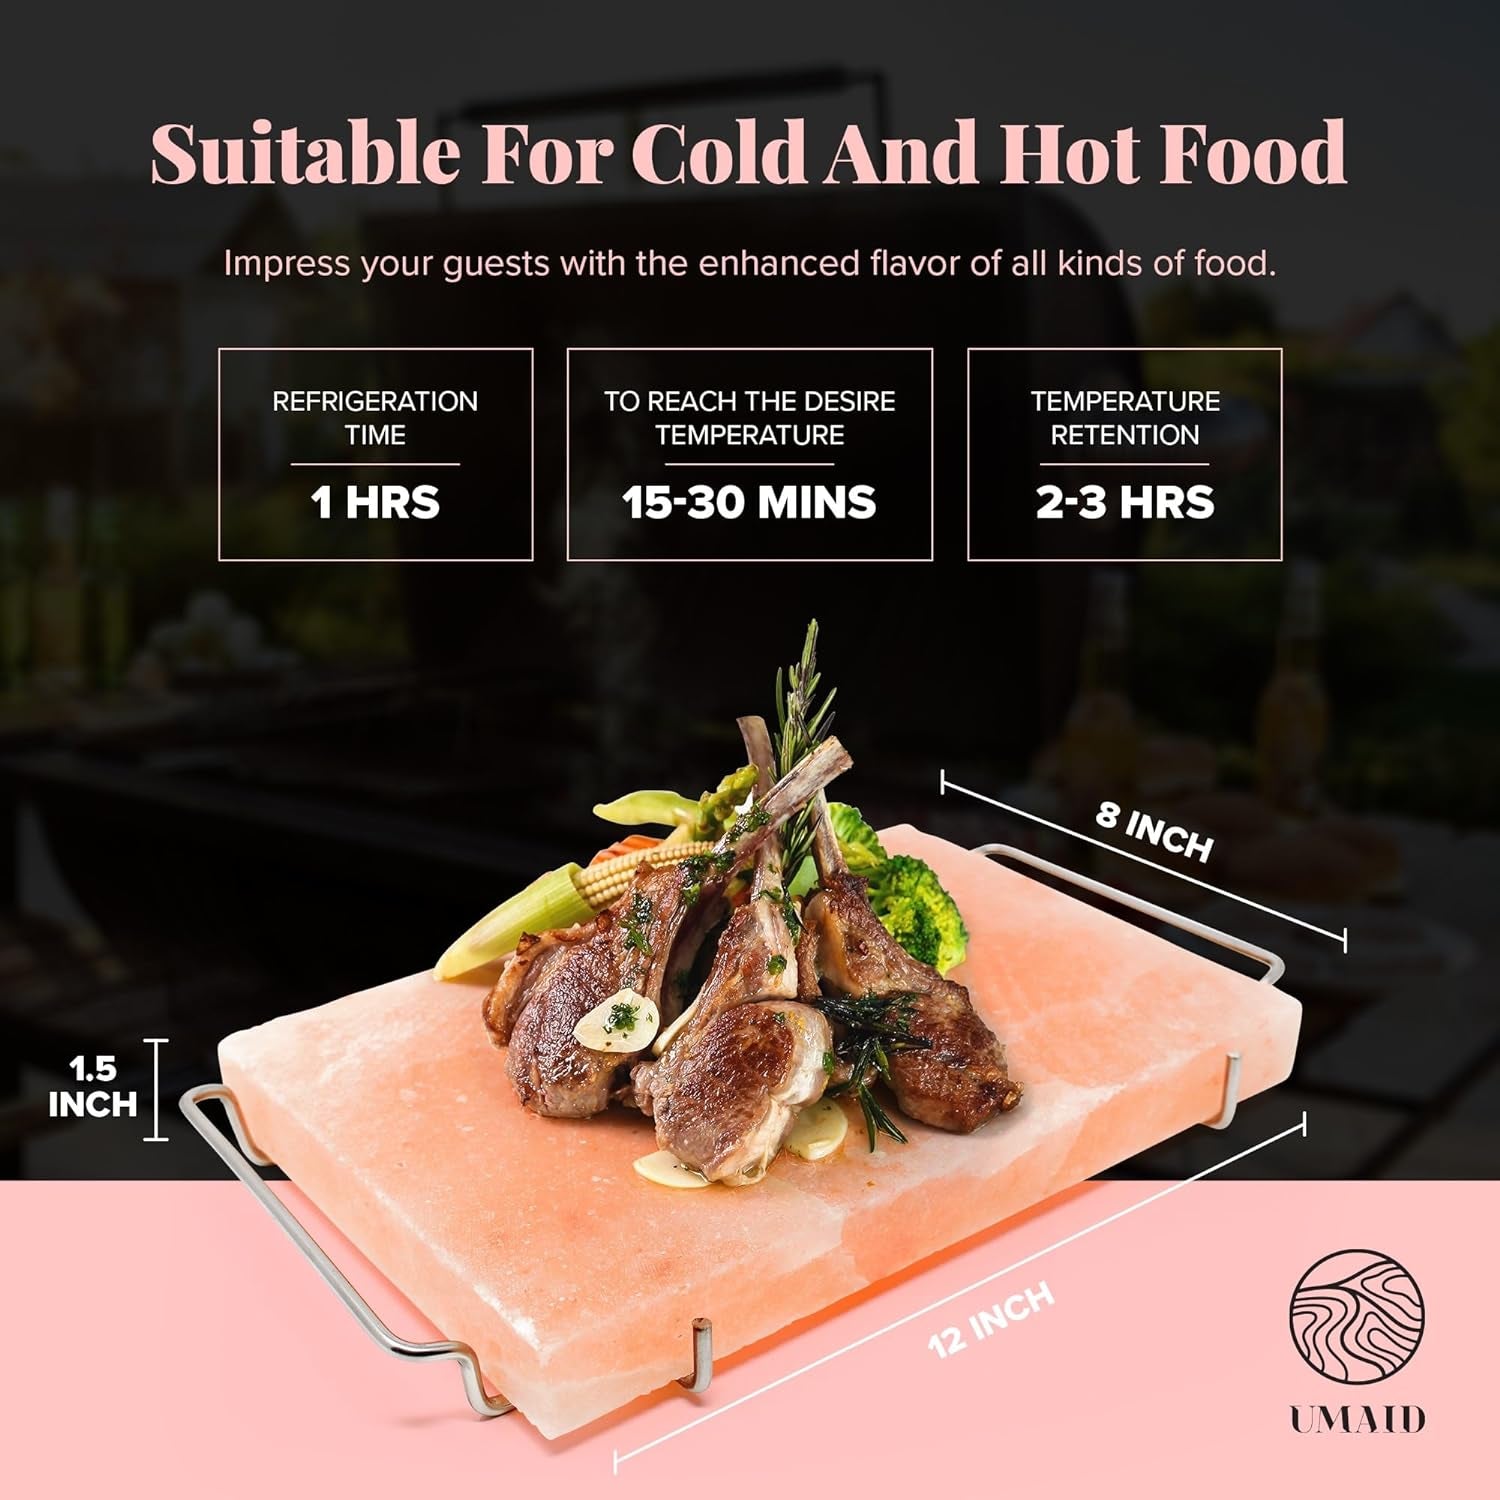 Himalayan Salt Block for Grilling, Cooking, Cutting and Serving,12X8X1.5 Food Grade Himalayan Pink Salt Stone on Stainless Steel Plate & Recipe Booklet, Unique Gifts for Men, Women, Chef, Cooks